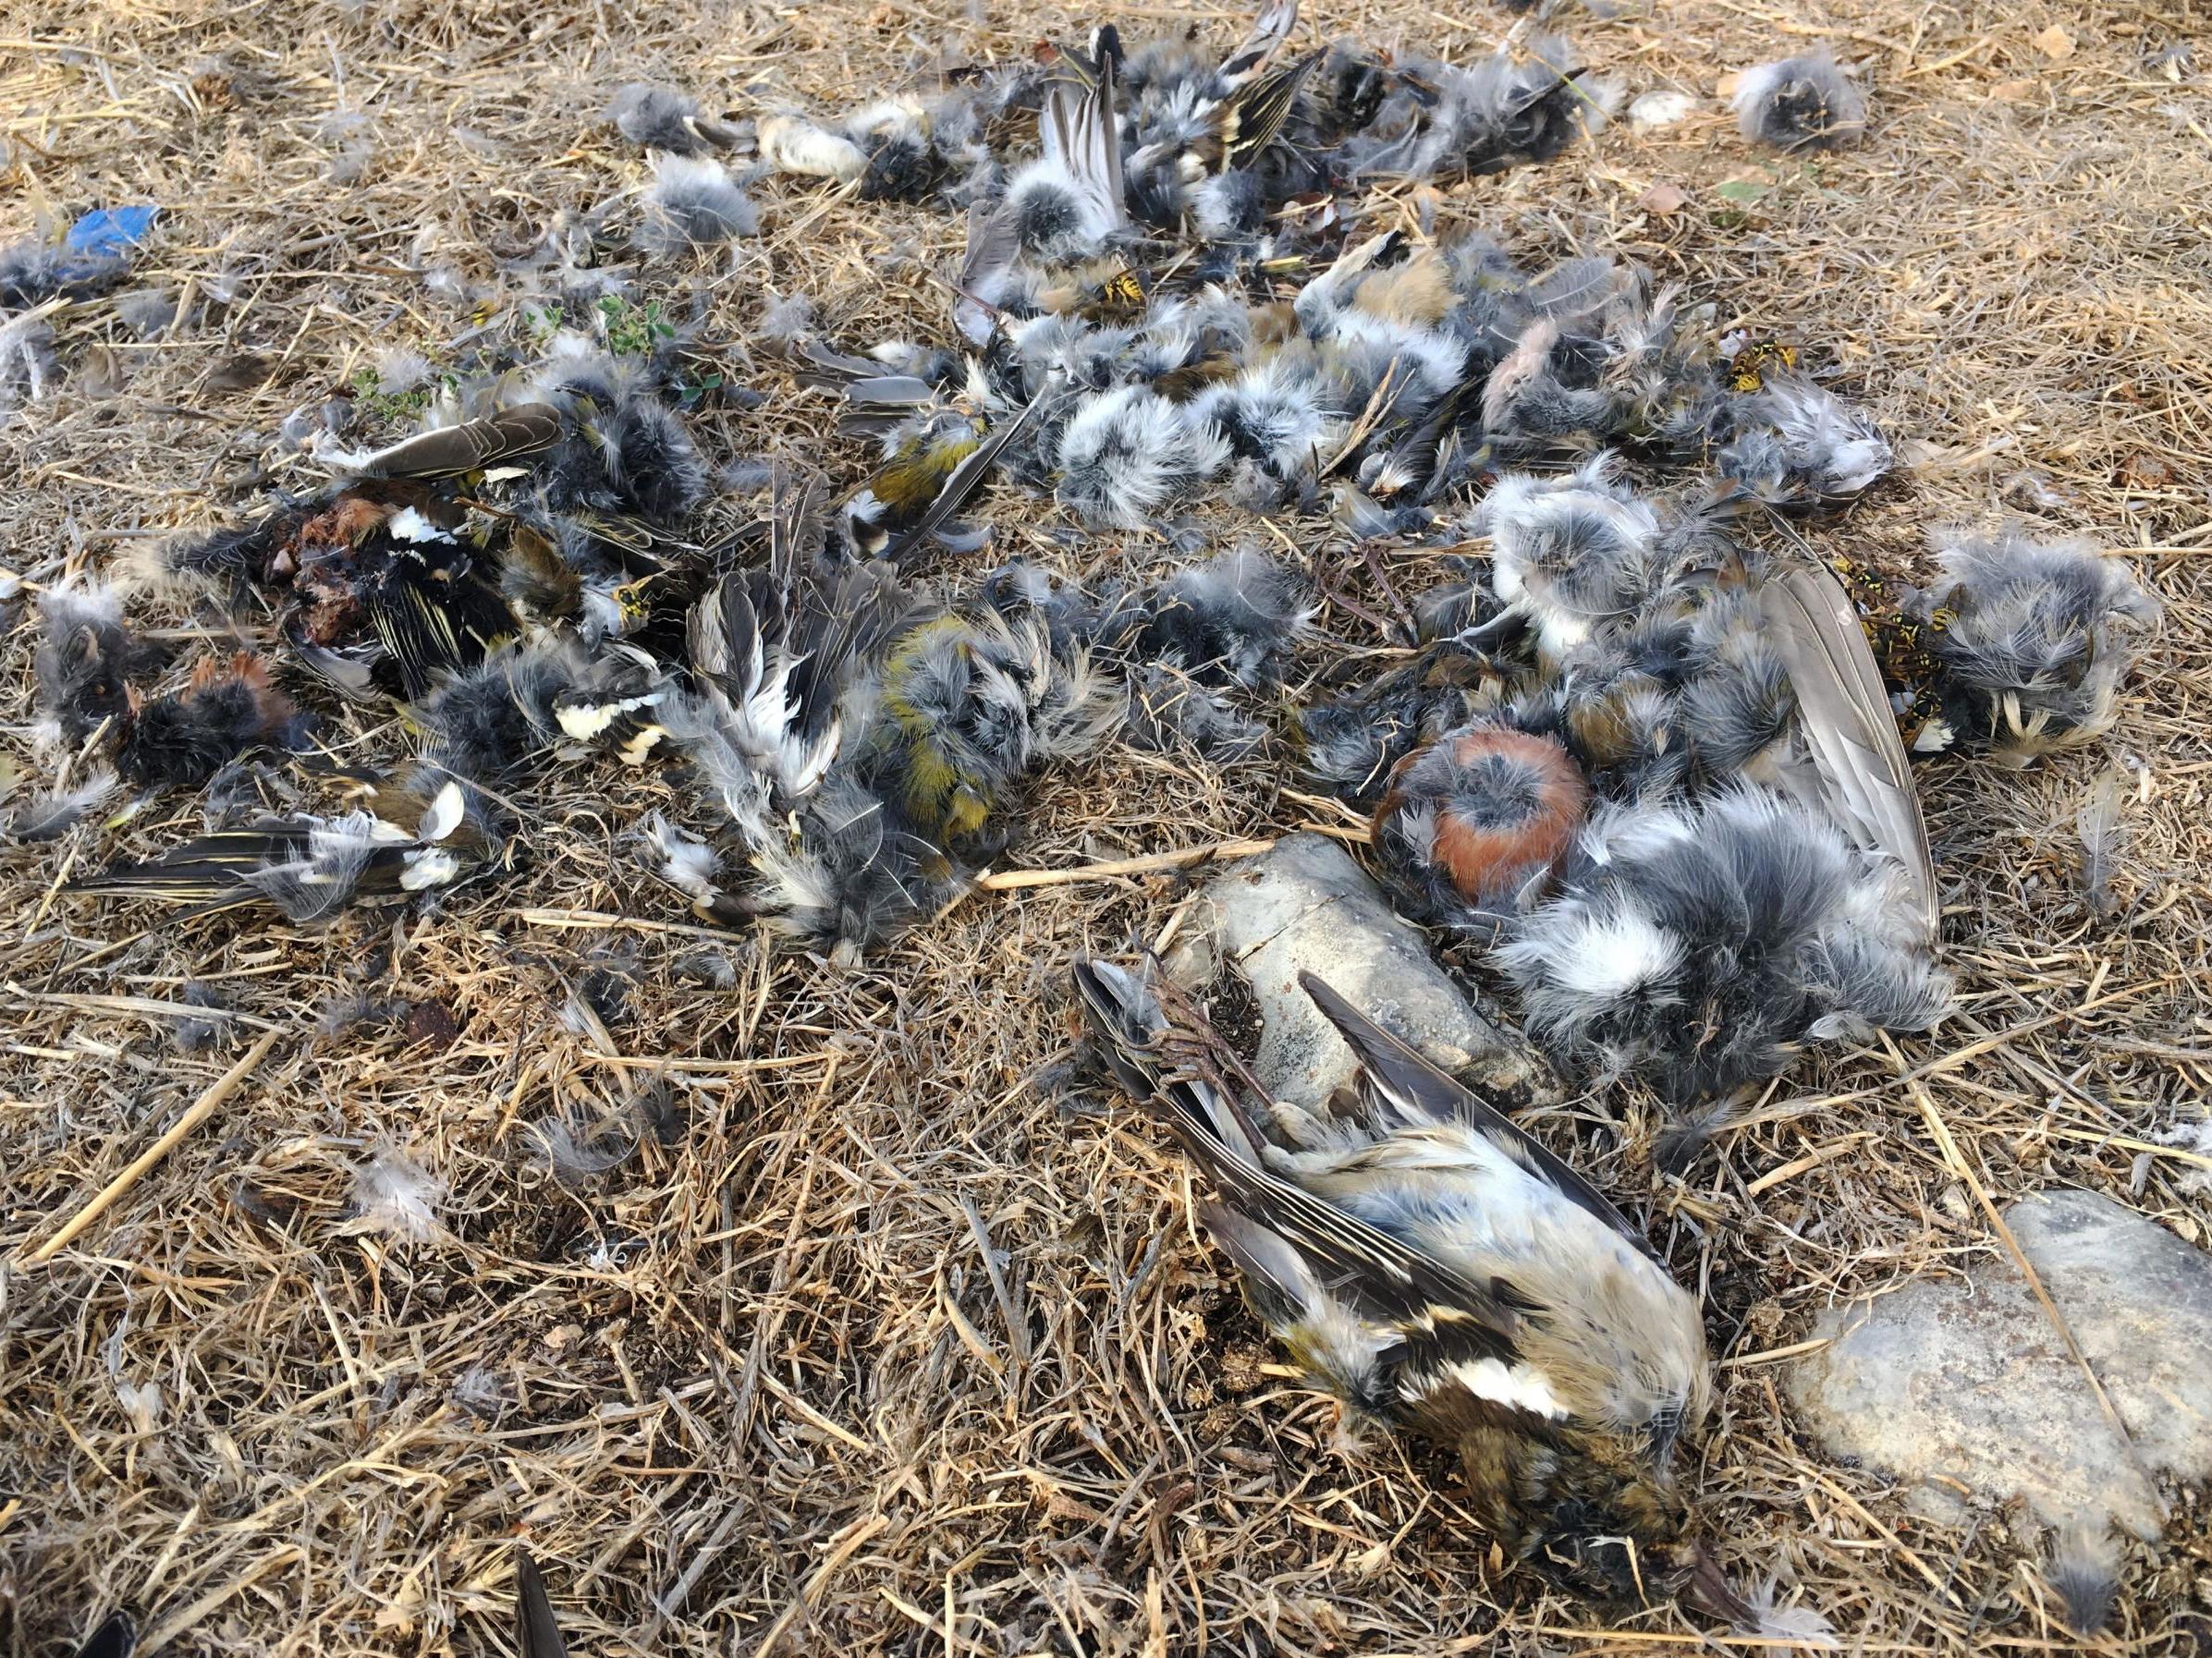 Feathers and remains of birds killed by hunters at a bird hunting area near the coastal city of Byblos north of Beirut (Getty)